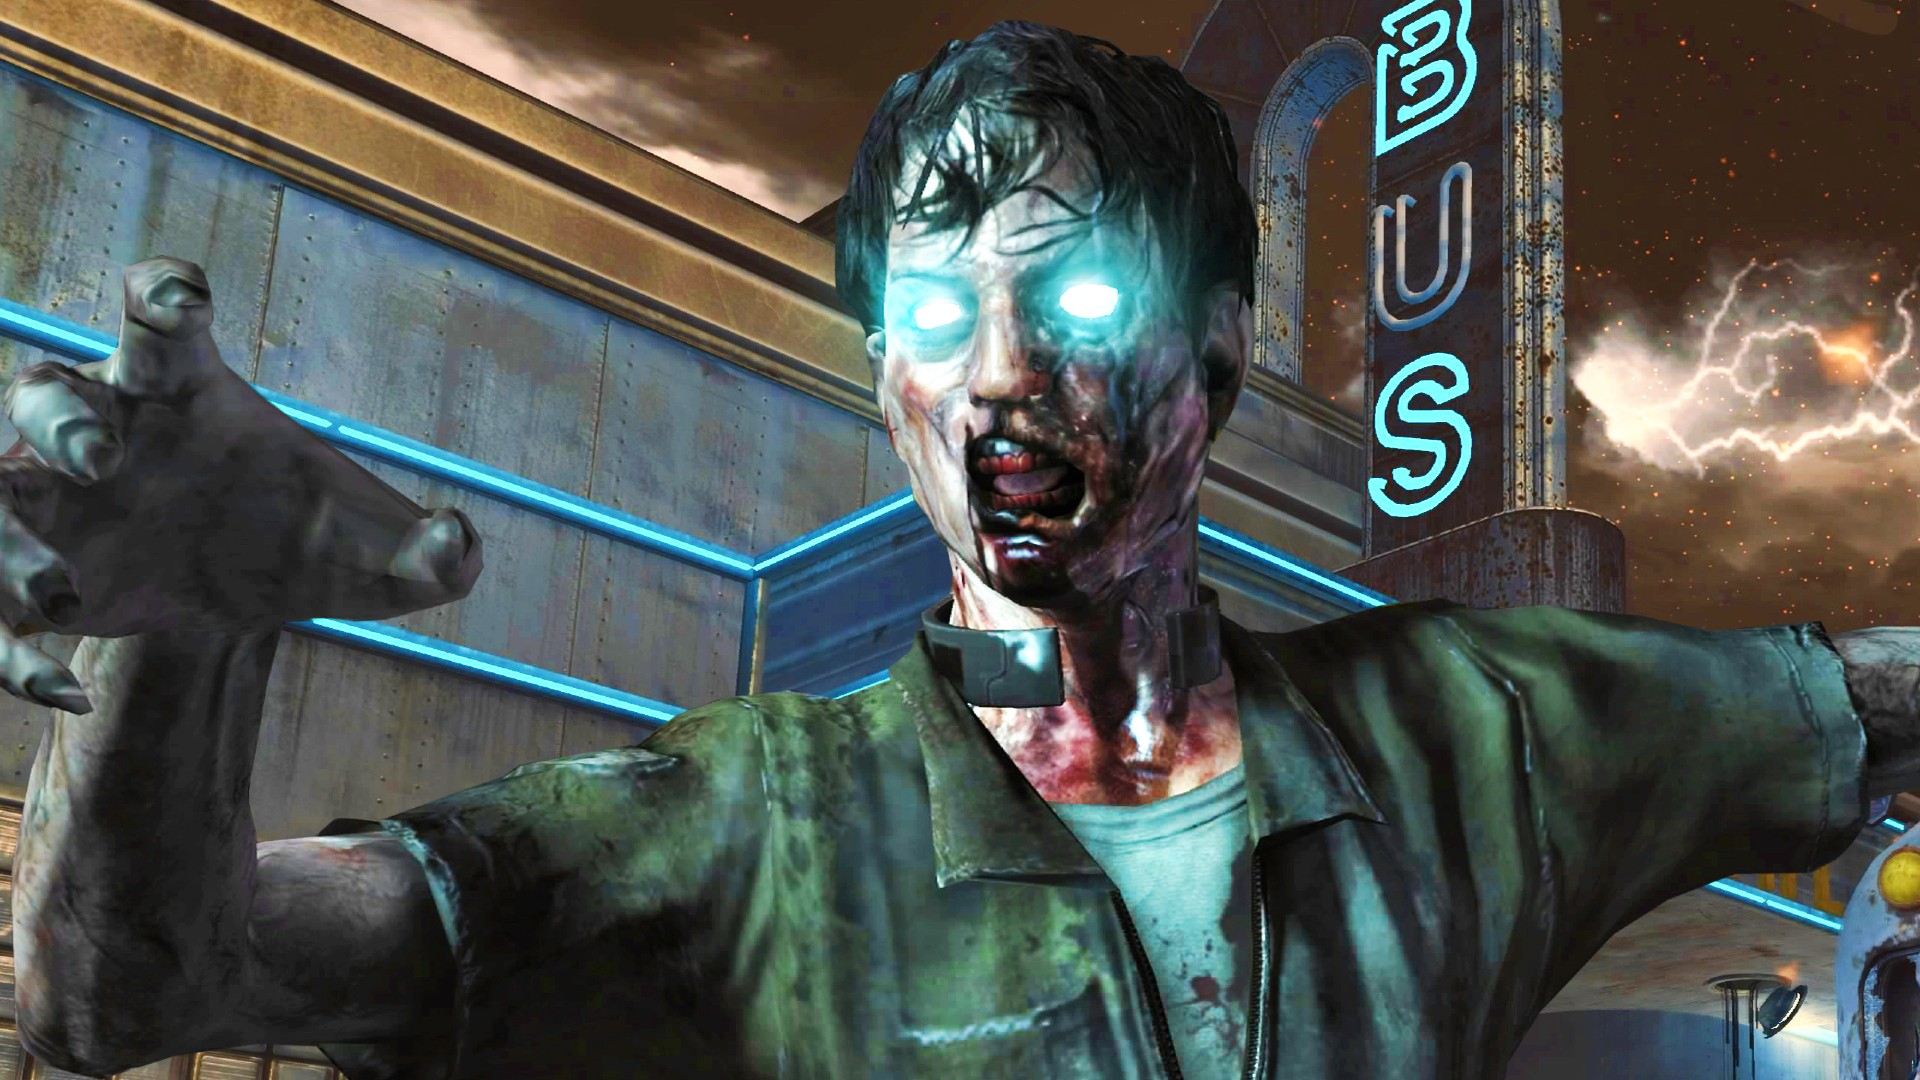 Black Ops 2 Zombies is back with new maps and modes, thanks to CoD mod